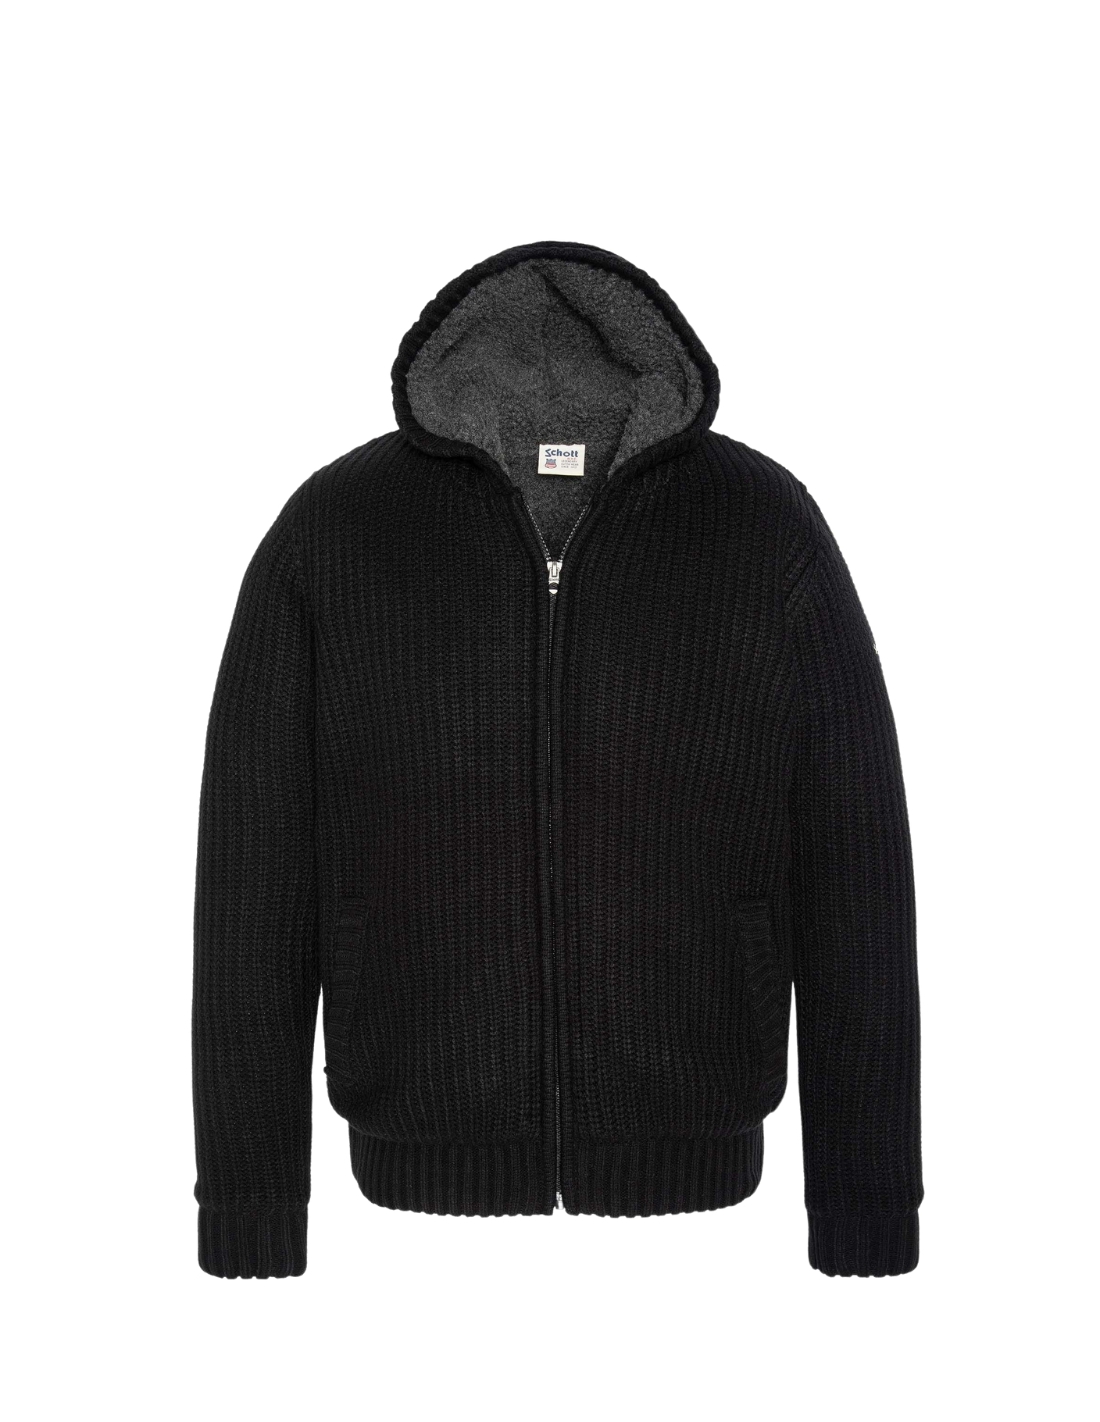 gilet homme doublé sherpa